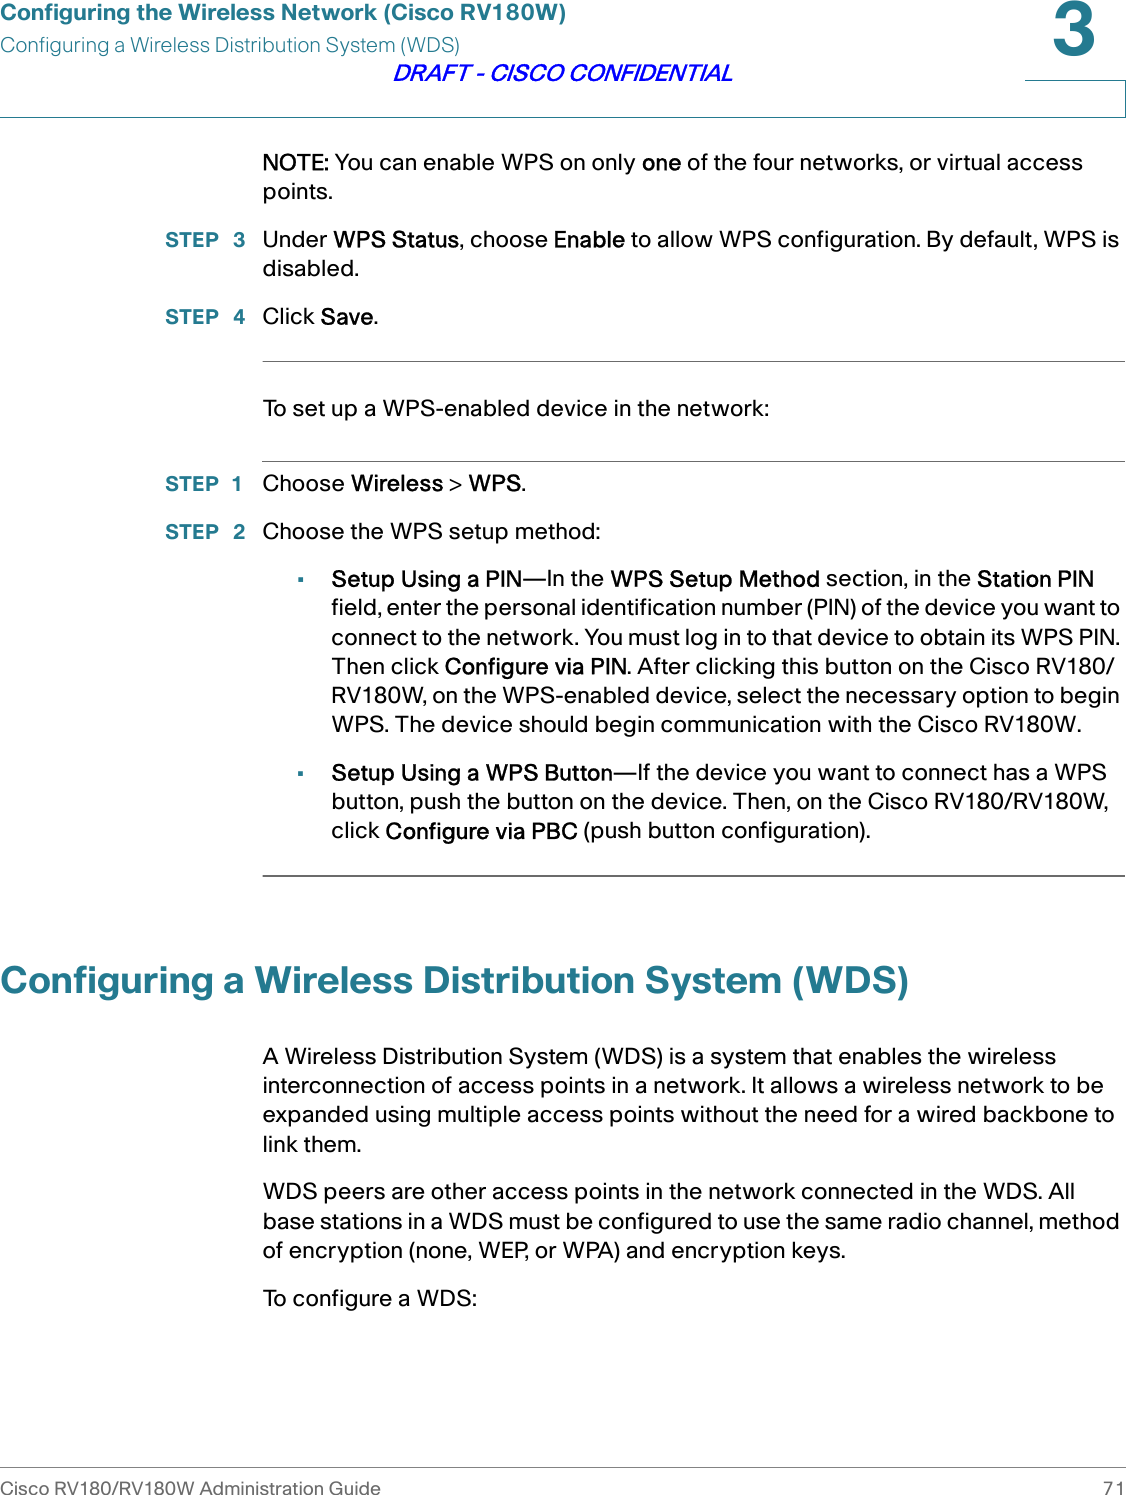 Configuring the Wireless Network (Cisco RV180W)Configuring a Wireless Distribution System (WDS)Cisco RV180/RV180W Administration Guide 713DRAFT - CISCO CONFIDENTIALNOTE: You can enable WPS on only one of the four networks, or virtual access points.STEP  3 Under WPS Status, choose Enable to allow WPS configuration. By default, WPS is disabled.STEP  4 Click Save.To set up a WPS-enabled device in the network:STEP 1 Choose Wireless &gt; WPS.STEP  2 Choose the WPS setup method:•Setup Using a PIN—In the WPS Setup Method section, in the Station PIN field, enter the personal identification number (PIN) of the device you want to connect to the network. You must log in to that device to obtain its WPS PIN. Then click Configure via PIN. After clicking this button on the Cisco RV180/RV180W, on the WPS-enabled device, select the necessary option to begin WPS. The device should begin communication with the Cisco RV180W. •Setup Using a WPS Button—If the device you want to connect has a WPS button, push the button on the device. Then, on the Cisco RV180/RV180W, click Configure via PBC (push button configuration).Configuring a Wireless Distribution System (WDS)A Wireless Distribution System (WDS) is a system that enables the wireless interconnection of access points in a network. It allows a wireless network to be expanded using multiple access points without the need for a wired backbone to link them.WDS peers are other access points in the network connected in the WDS. All base stations in a WDS must be configured to use the same radio channel, method of encryption (none, WEP, or WPA) and encryption keys.To configure a WDS: